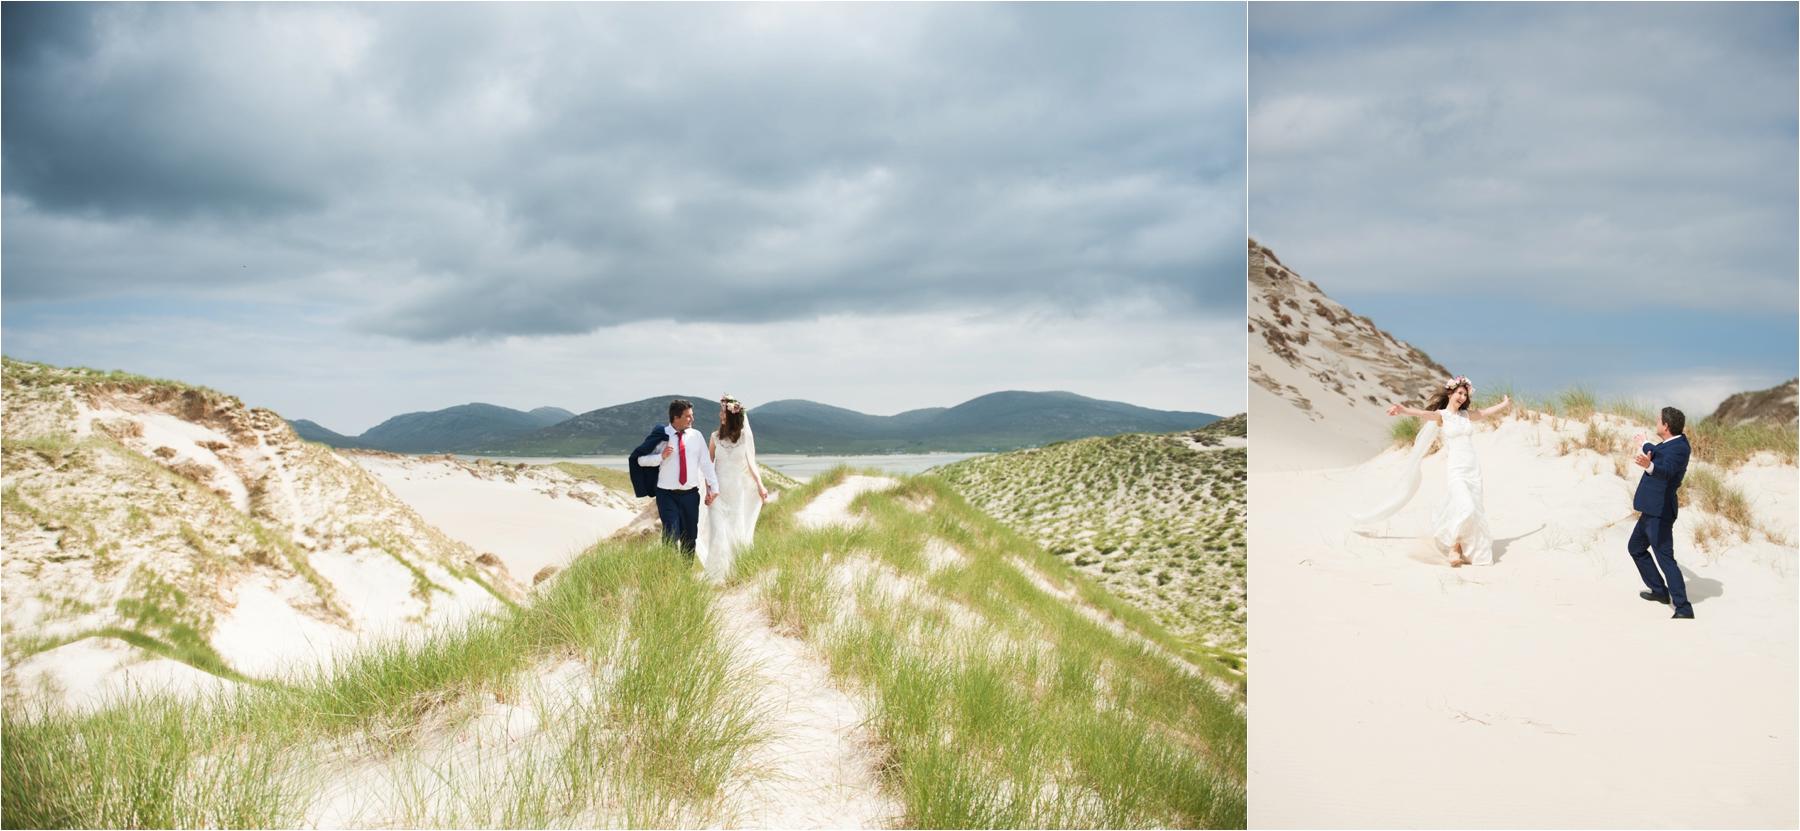 Bride and groom Ilona and Emil walk arm in arm and Emil has his jacket over his shoulder as they walk through sand dunes and sea grass on Luskentyre Beach. They married outdoors in front of two witnesses.